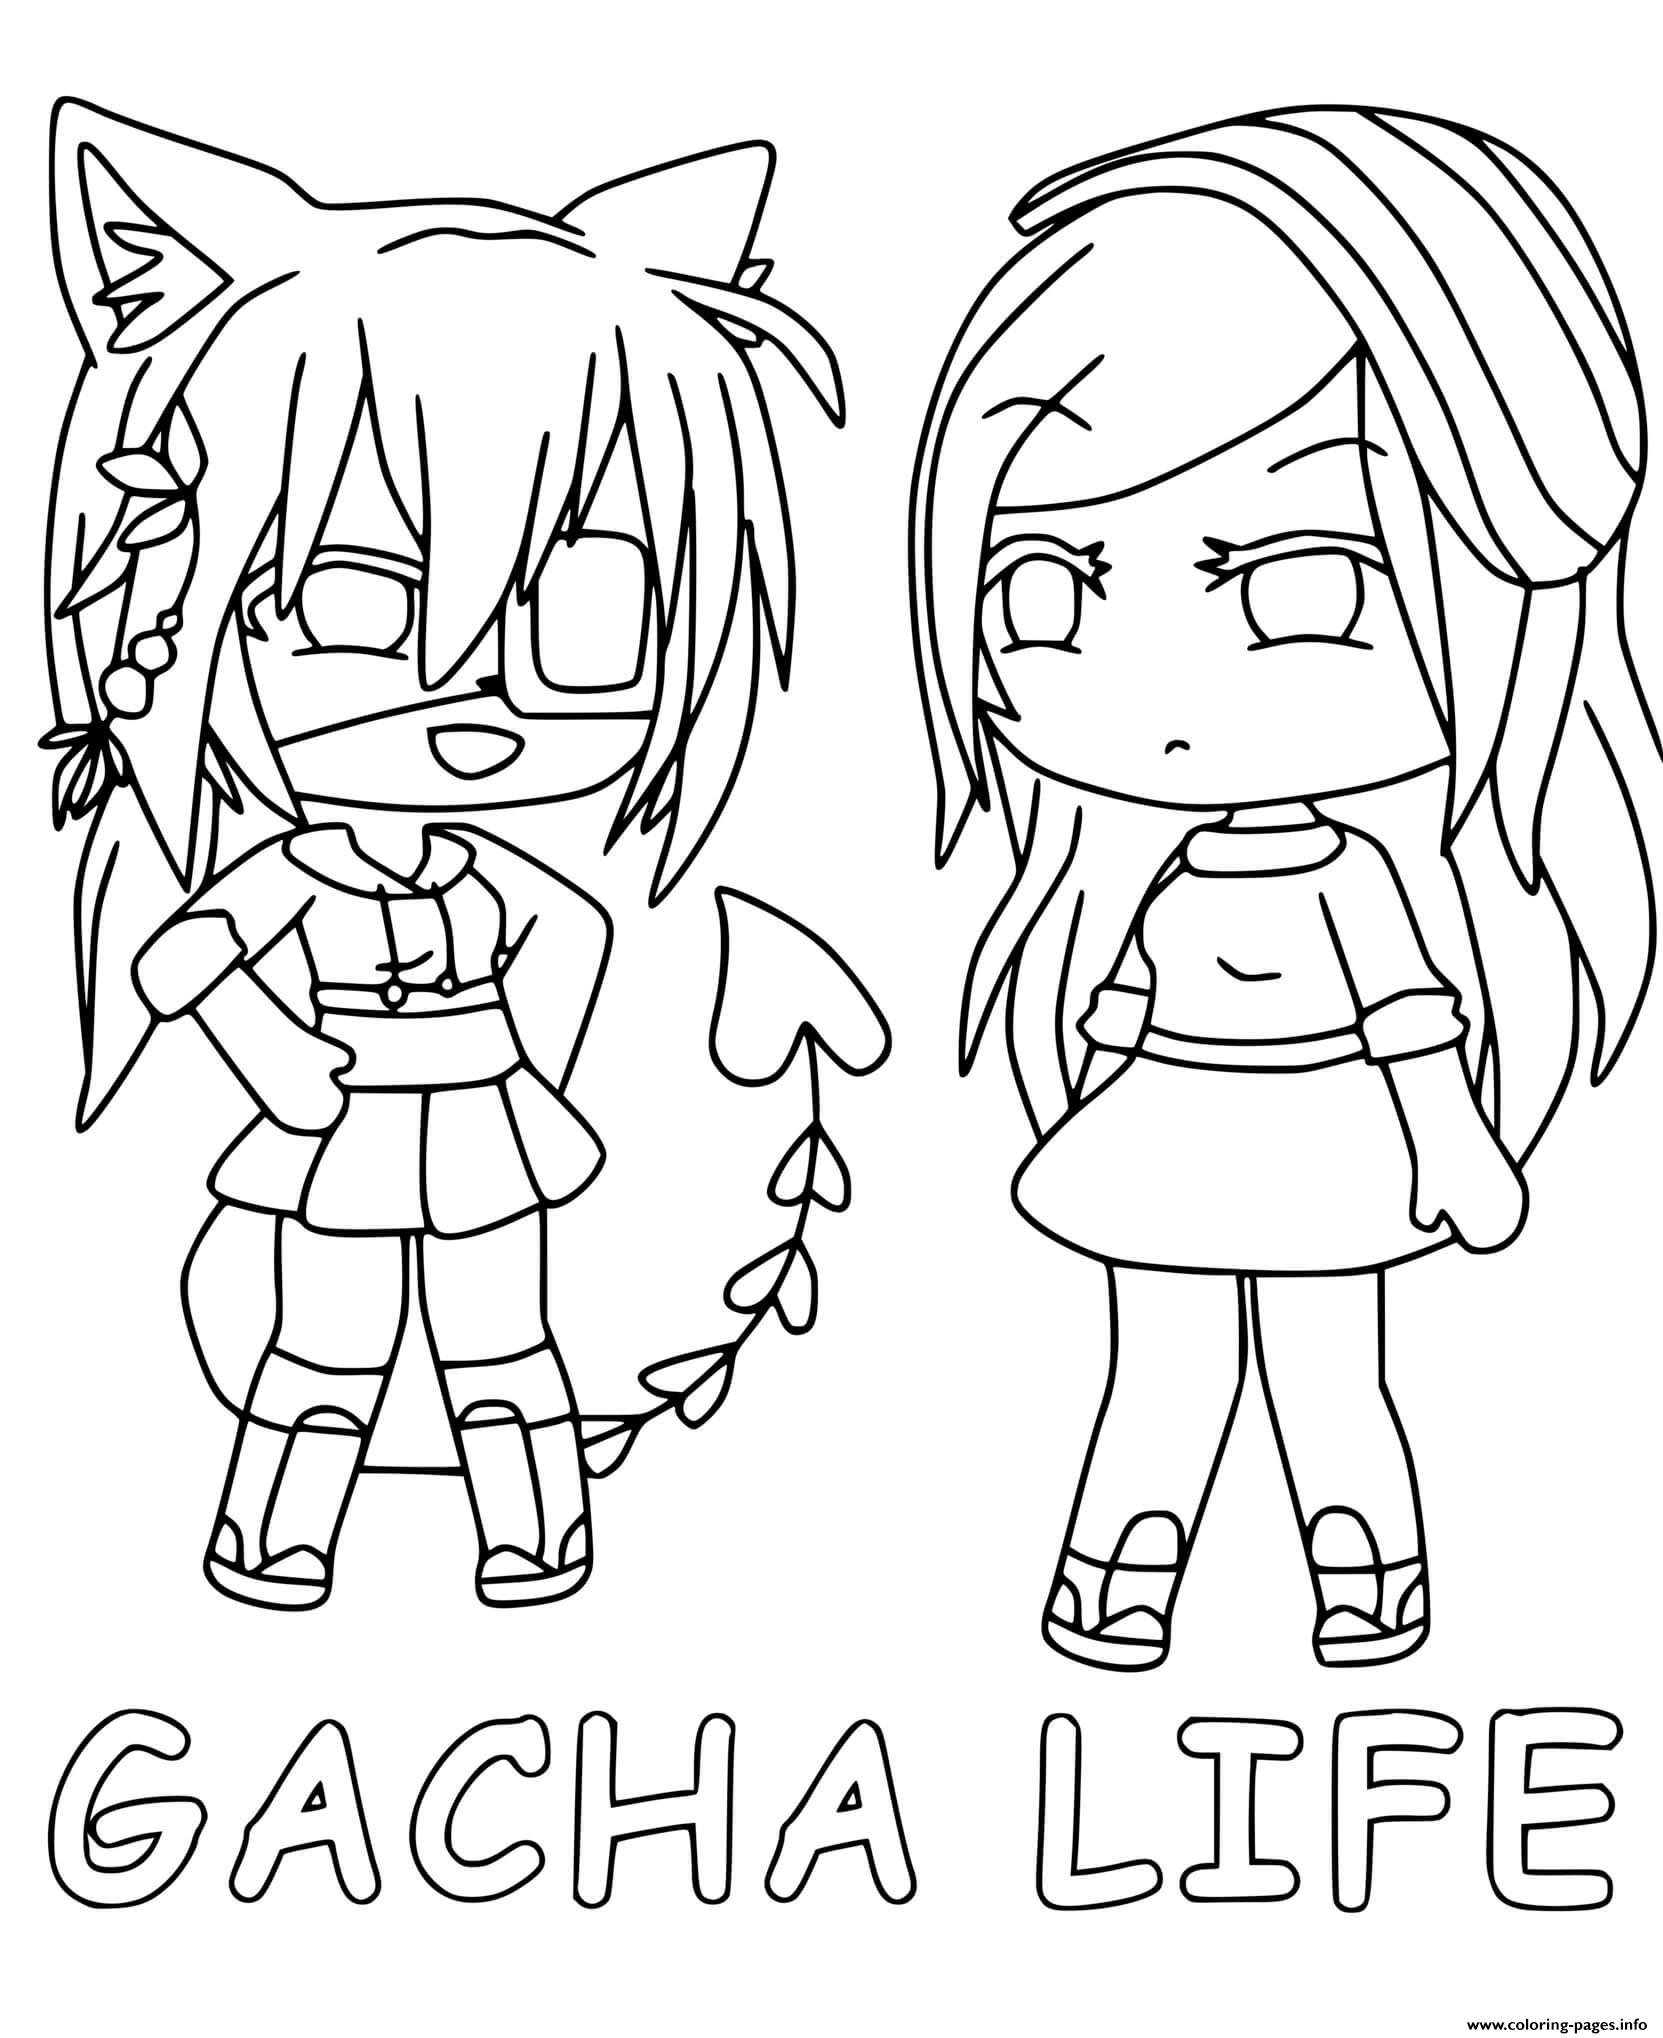 Gacha Life And His Friend coloring